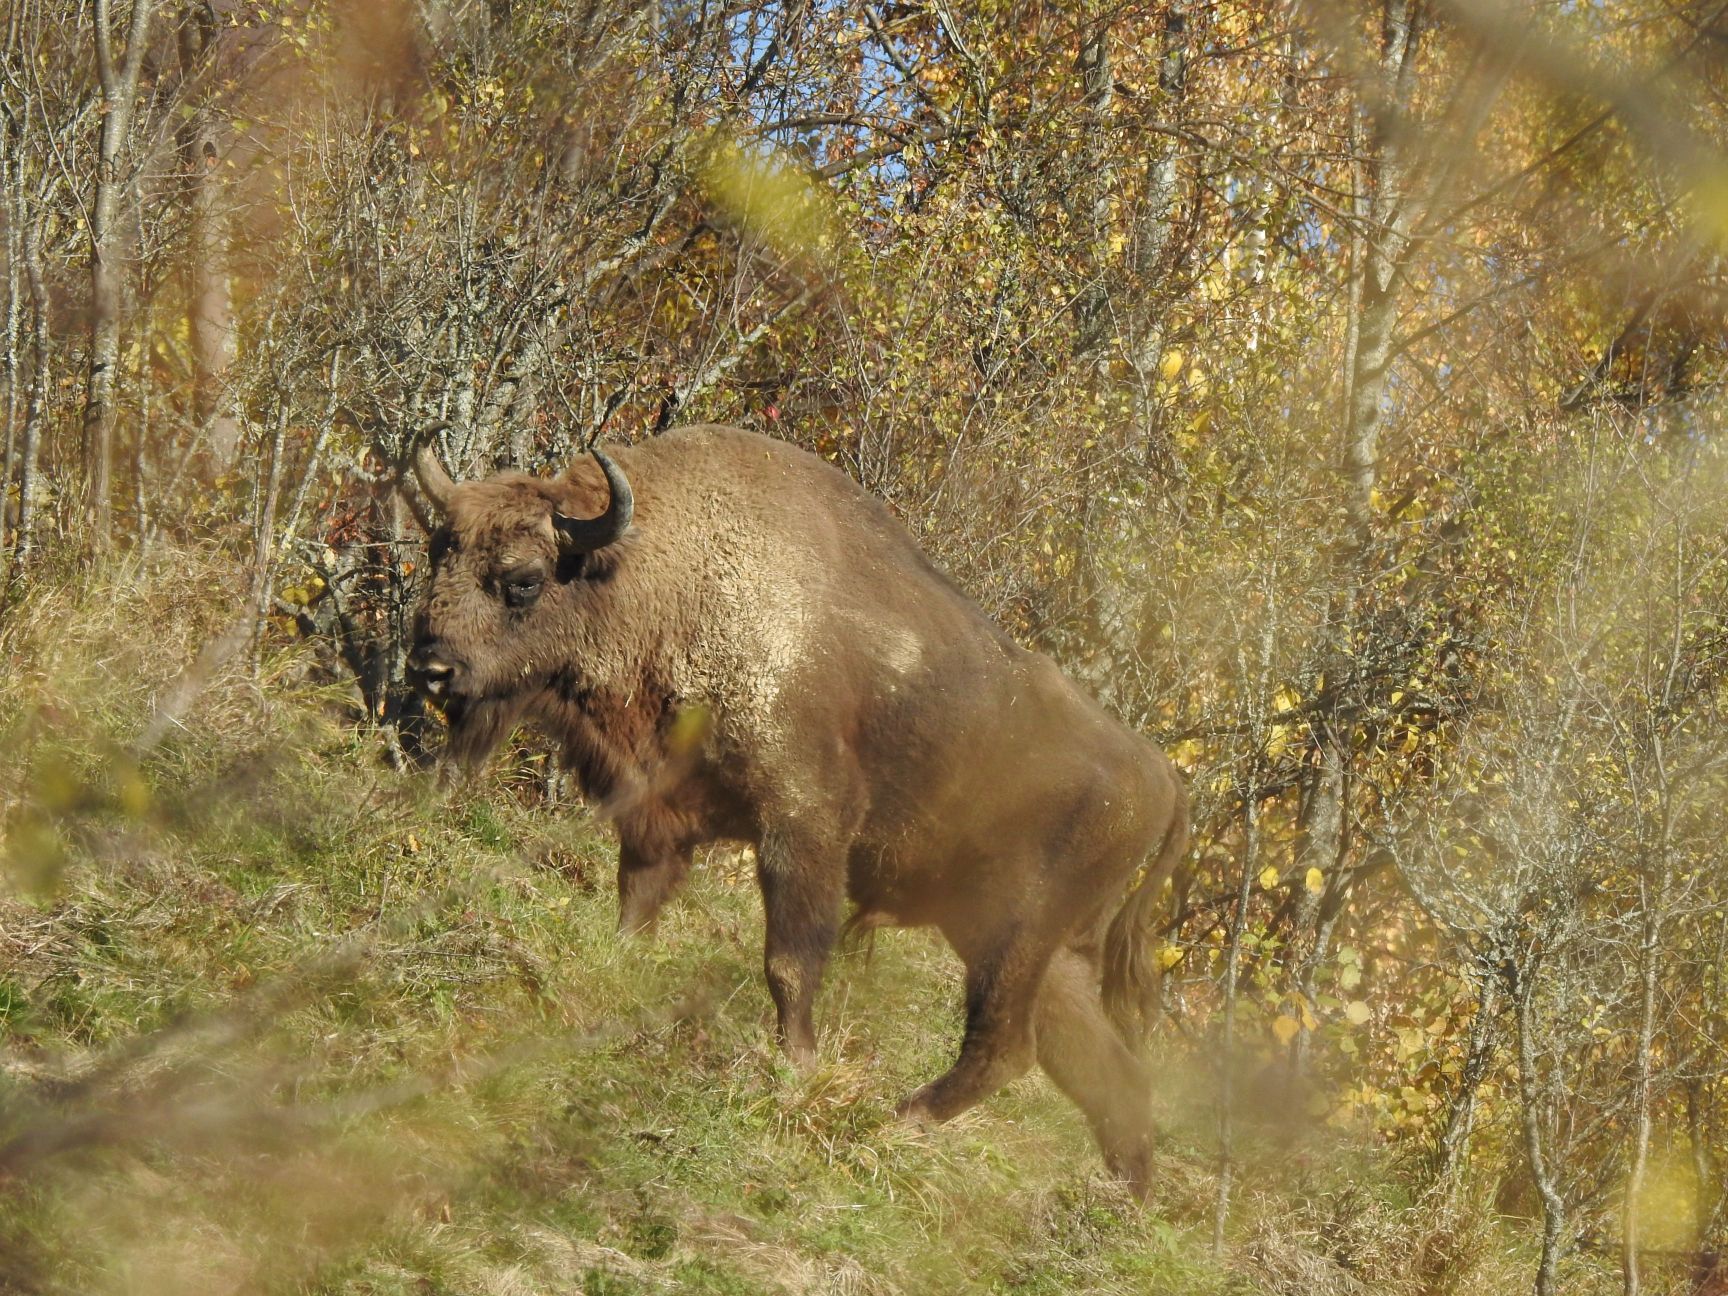 Wild bison, as pictured here in Romania, have a huge, positive impact on biodiversity. Photo: Petru Stoicanescu